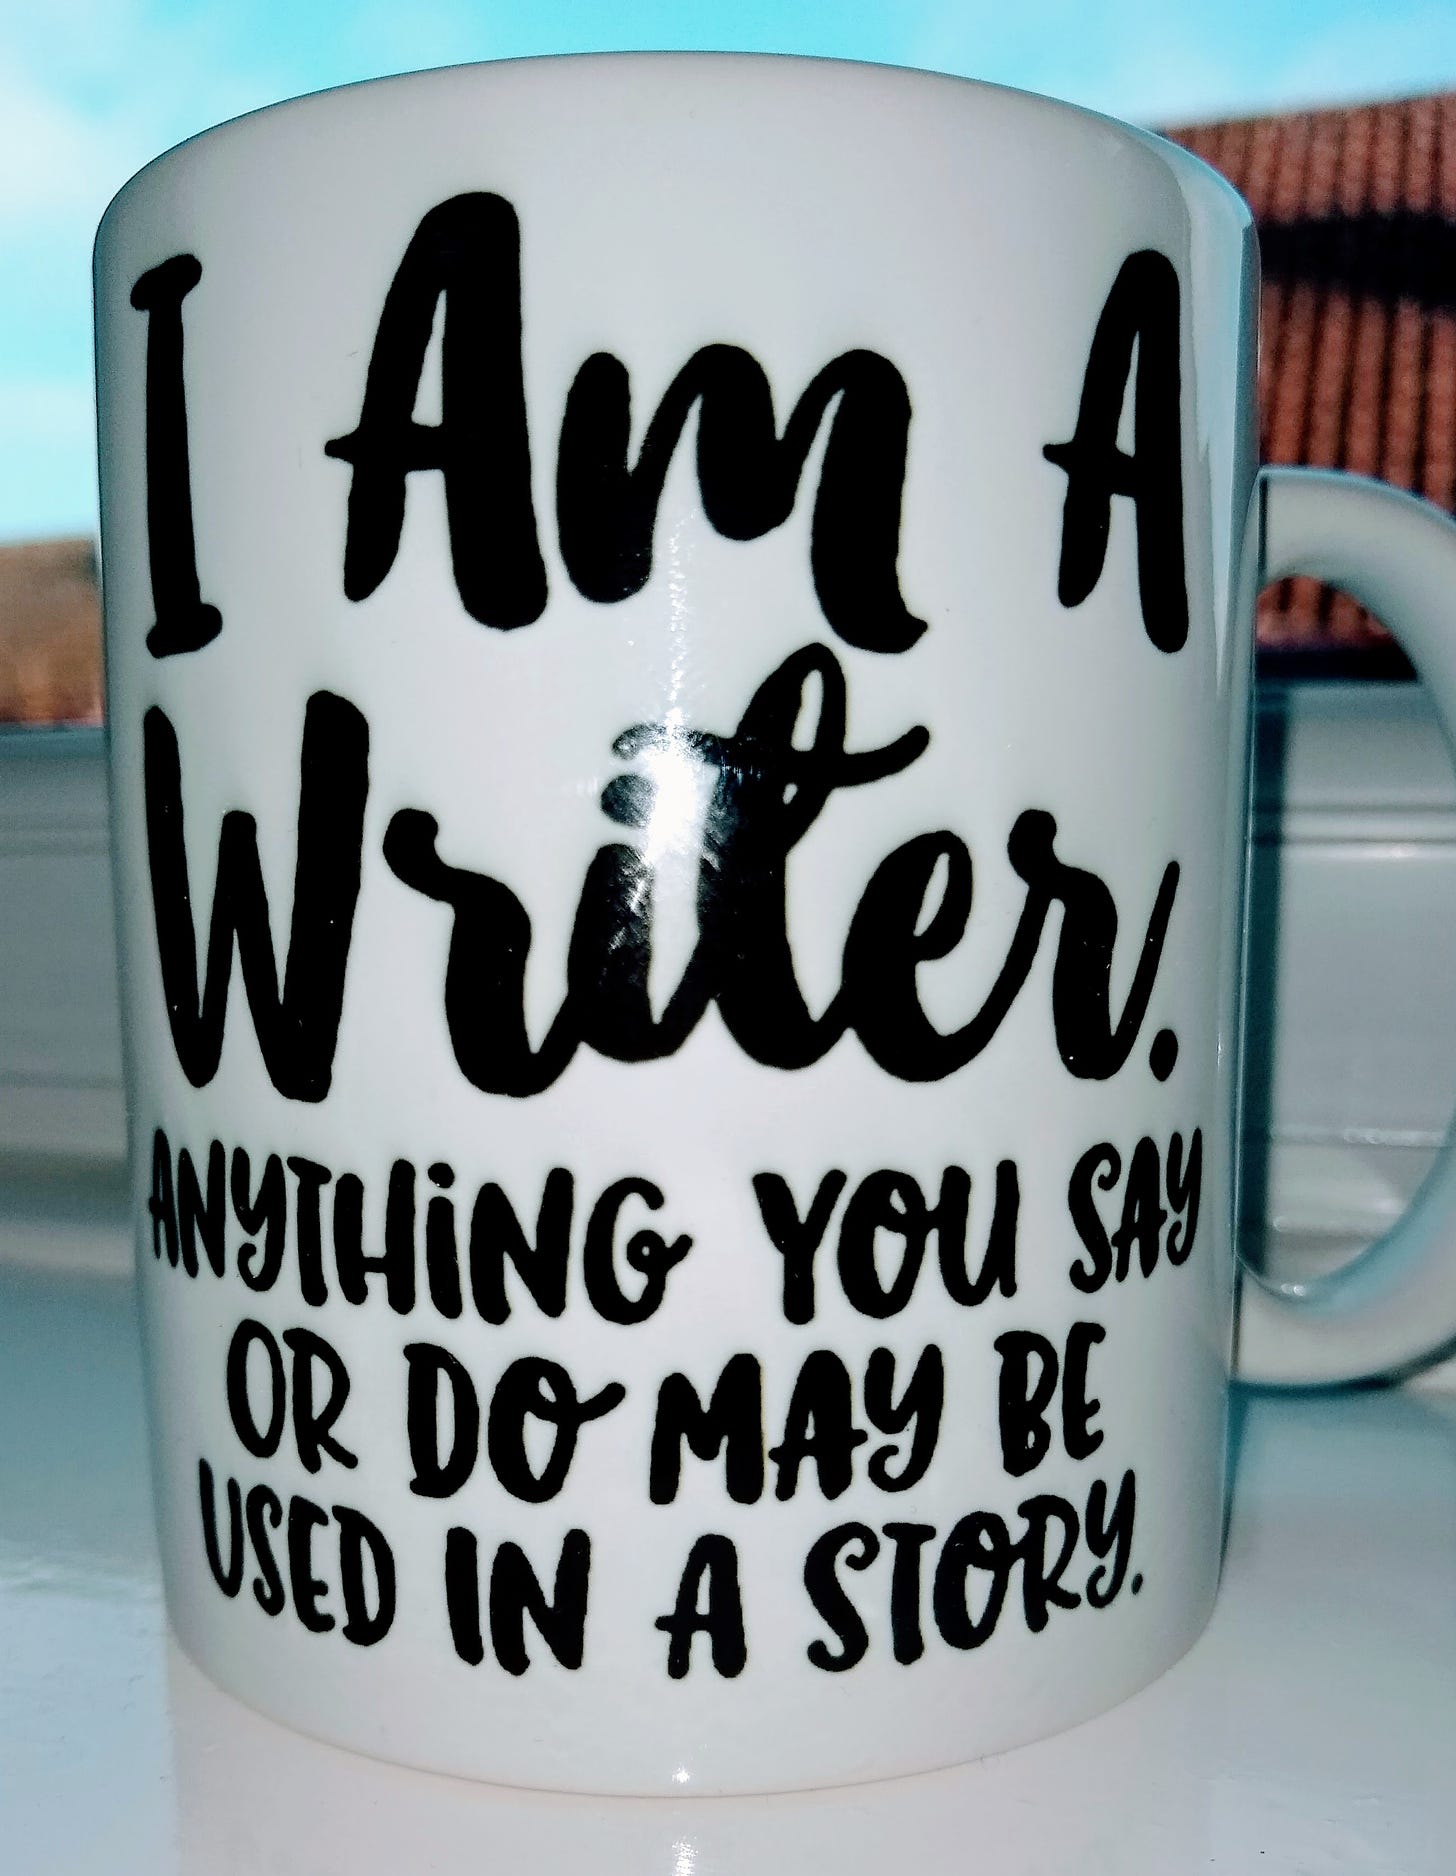 A photograph of a white tea mug sat on a window shelf, decorated wth black text stating: "I am a writer. Anything you say or do may be used in a story."